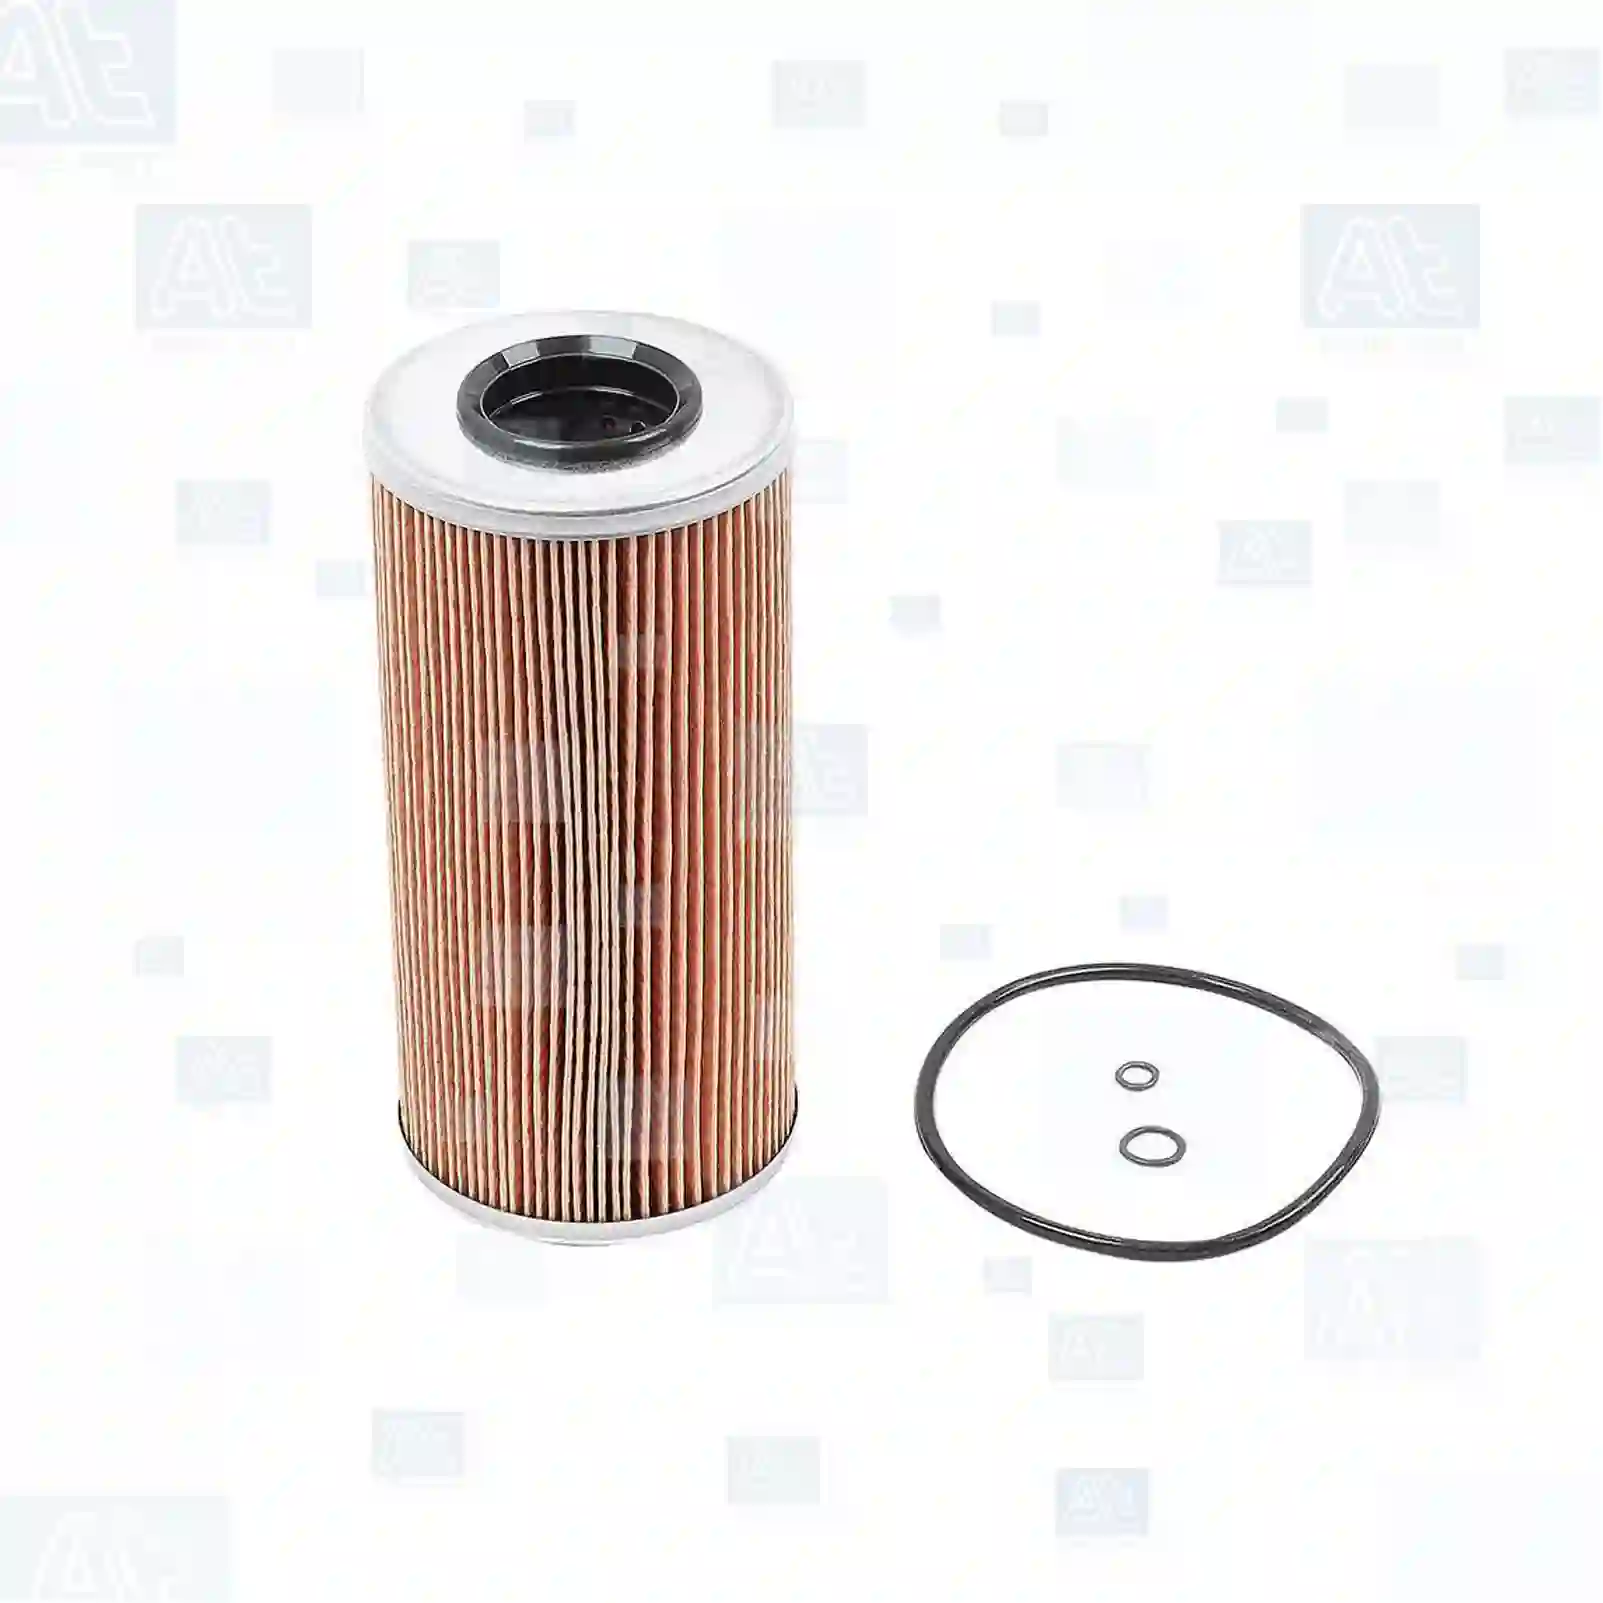 Oil filter insert, at no 77702106, oem no: 6021800009, 6061800009, 6061840025, 6061840125, 6061840225, F926202510010, 51055006073, 51055040105, 6021800009, 6021840025, 6061800009, 606180000967, 6061800109, 6061800910, 6061840025, 6061840125, 6061840225, 6281800009, 6281800109, 6281840025, 6005019830, 6061800009ME, 6611803209, 6611803309, 6611803409, 6611843325, 6061800009, 07W115436A, ZG01736-0008 At Spare Part | Engine, Accelerator Pedal, Camshaft, Connecting Rod, Crankcase, Crankshaft, Cylinder Head, Engine Suspension Mountings, Exhaust Manifold, Exhaust Gas Recirculation, Filter Kits, Flywheel Housing, General Overhaul Kits, Engine, Intake Manifold, Oil Cleaner, Oil Cooler, Oil Filter, Oil Pump, Oil Sump, Piston & Liner, Sensor & Switch, Timing Case, Turbocharger, Cooling System, Belt Tensioner, Coolant Filter, Coolant Pipe, Corrosion Prevention Agent, Drive, Expansion Tank, Fan, Intercooler, Monitors & Gauges, Radiator, Thermostat, V-Belt / Timing belt, Water Pump, Fuel System, Electronical Injector Unit, Feed Pump, Fuel Filter, cpl., Fuel Gauge Sender,  Fuel Line, Fuel Pump, Fuel Tank, Injection Line Kit, Injection Pump, Exhaust System, Clutch & Pedal, Gearbox, Propeller Shaft, Axles, Brake System, Hubs & Wheels, Suspension, Leaf Spring, Universal Parts / Accessories, Steering, Electrical System, Cabin Oil filter insert, at no 77702106, oem no: 6021800009, 6061800009, 6061840025, 6061840125, 6061840225, F926202510010, 51055006073, 51055040105, 6021800009, 6021840025, 6061800009, 606180000967, 6061800109, 6061800910, 6061840025, 6061840125, 6061840225, 6281800009, 6281800109, 6281840025, 6005019830, 6061800009ME, 6611803209, 6611803309, 6611803409, 6611843325, 6061800009, 07W115436A, ZG01736-0008 At Spare Part | Engine, Accelerator Pedal, Camshaft, Connecting Rod, Crankcase, Crankshaft, Cylinder Head, Engine Suspension Mountings, Exhaust Manifold, Exhaust Gas Recirculation, Filter Kits, Flywheel Housing, General Overhaul Kits, Engine, Intake Manifold, Oil Cleaner, Oil Cooler, Oil Filter, Oil Pump, Oil Sump, Piston & Liner, Sensor & Switch, Timing Case, Turbocharger, Cooling System, Belt Tensioner, Coolant Filter, Coolant Pipe, Corrosion Prevention Agent, Drive, Expansion Tank, Fan, Intercooler, Monitors & Gauges, Radiator, Thermostat, V-Belt / Timing belt, Water Pump, Fuel System, Electronical Injector Unit, Feed Pump, Fuel Filter, cpl., Fuel Gauge Sender,  Fuel Line, Fuel Pump, Fuel Tank, Injection Line Kit, Injection Pump, Exhaust System, Clutch & Pedal, Gearbox, Propeller Shaft, Axles, Brake System, Hubs & Wheels, Suspension, Leaf Spring, Universal Parts / Accessories, Steering, Electrical System, Cabin